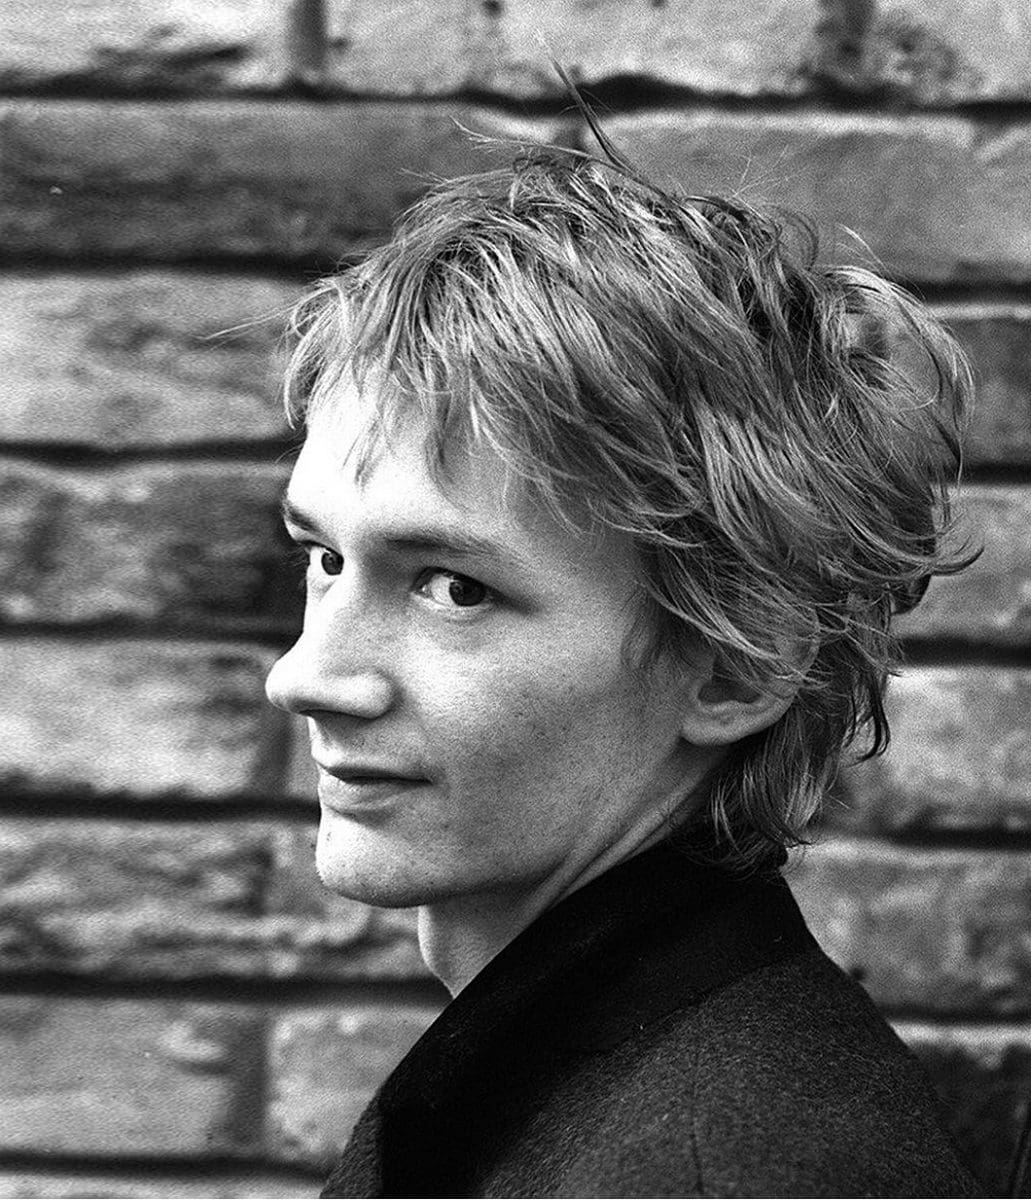 RIP Keith Levene, founding member of both The Clash and Public Image Ltd (PiL), dies